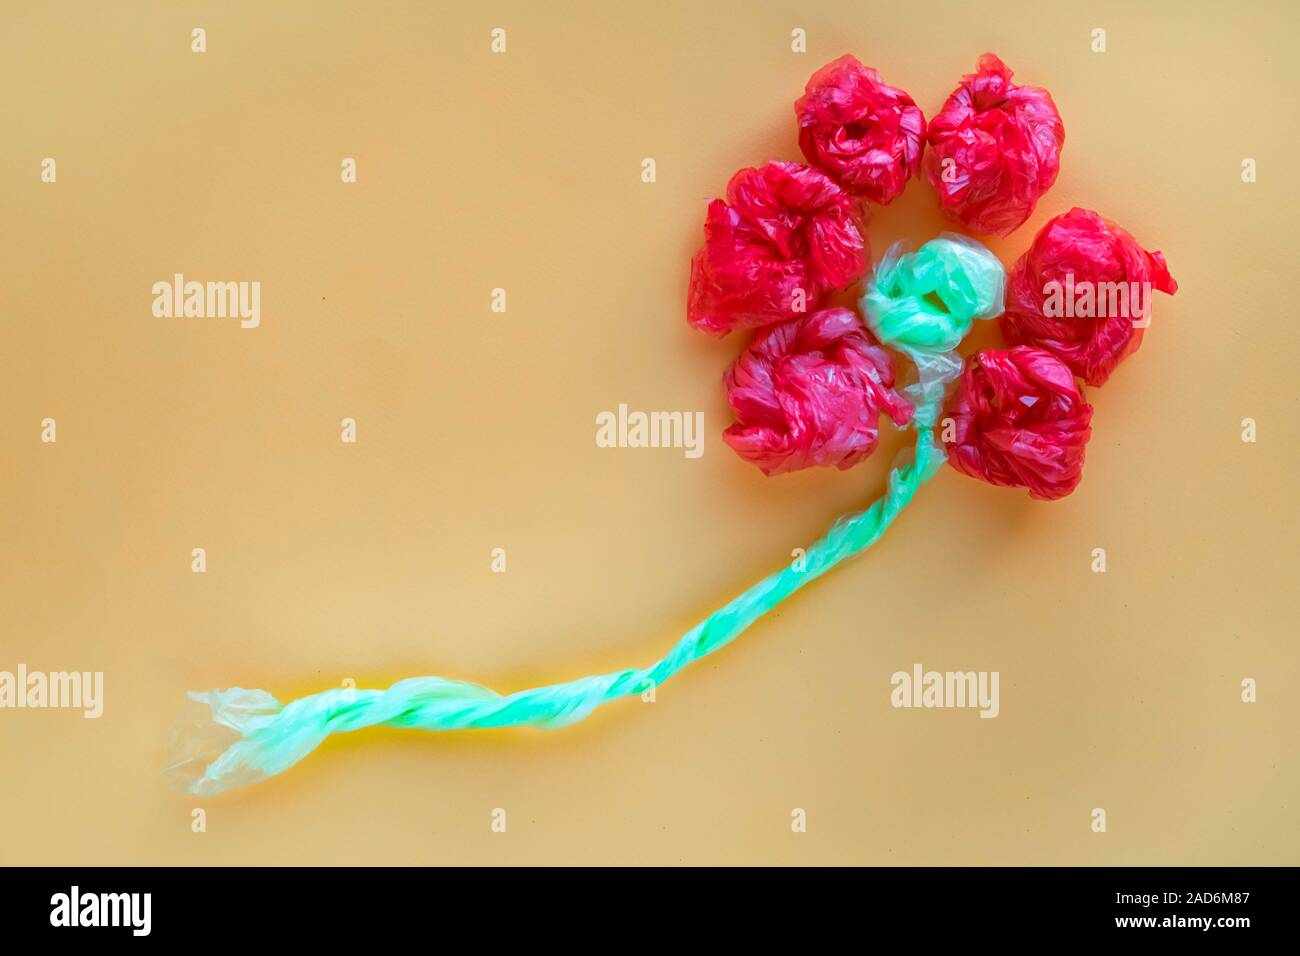 Flower made of rolled colorful plastic bags. Recycling and waste reducing concept. Top view. Stock Photo